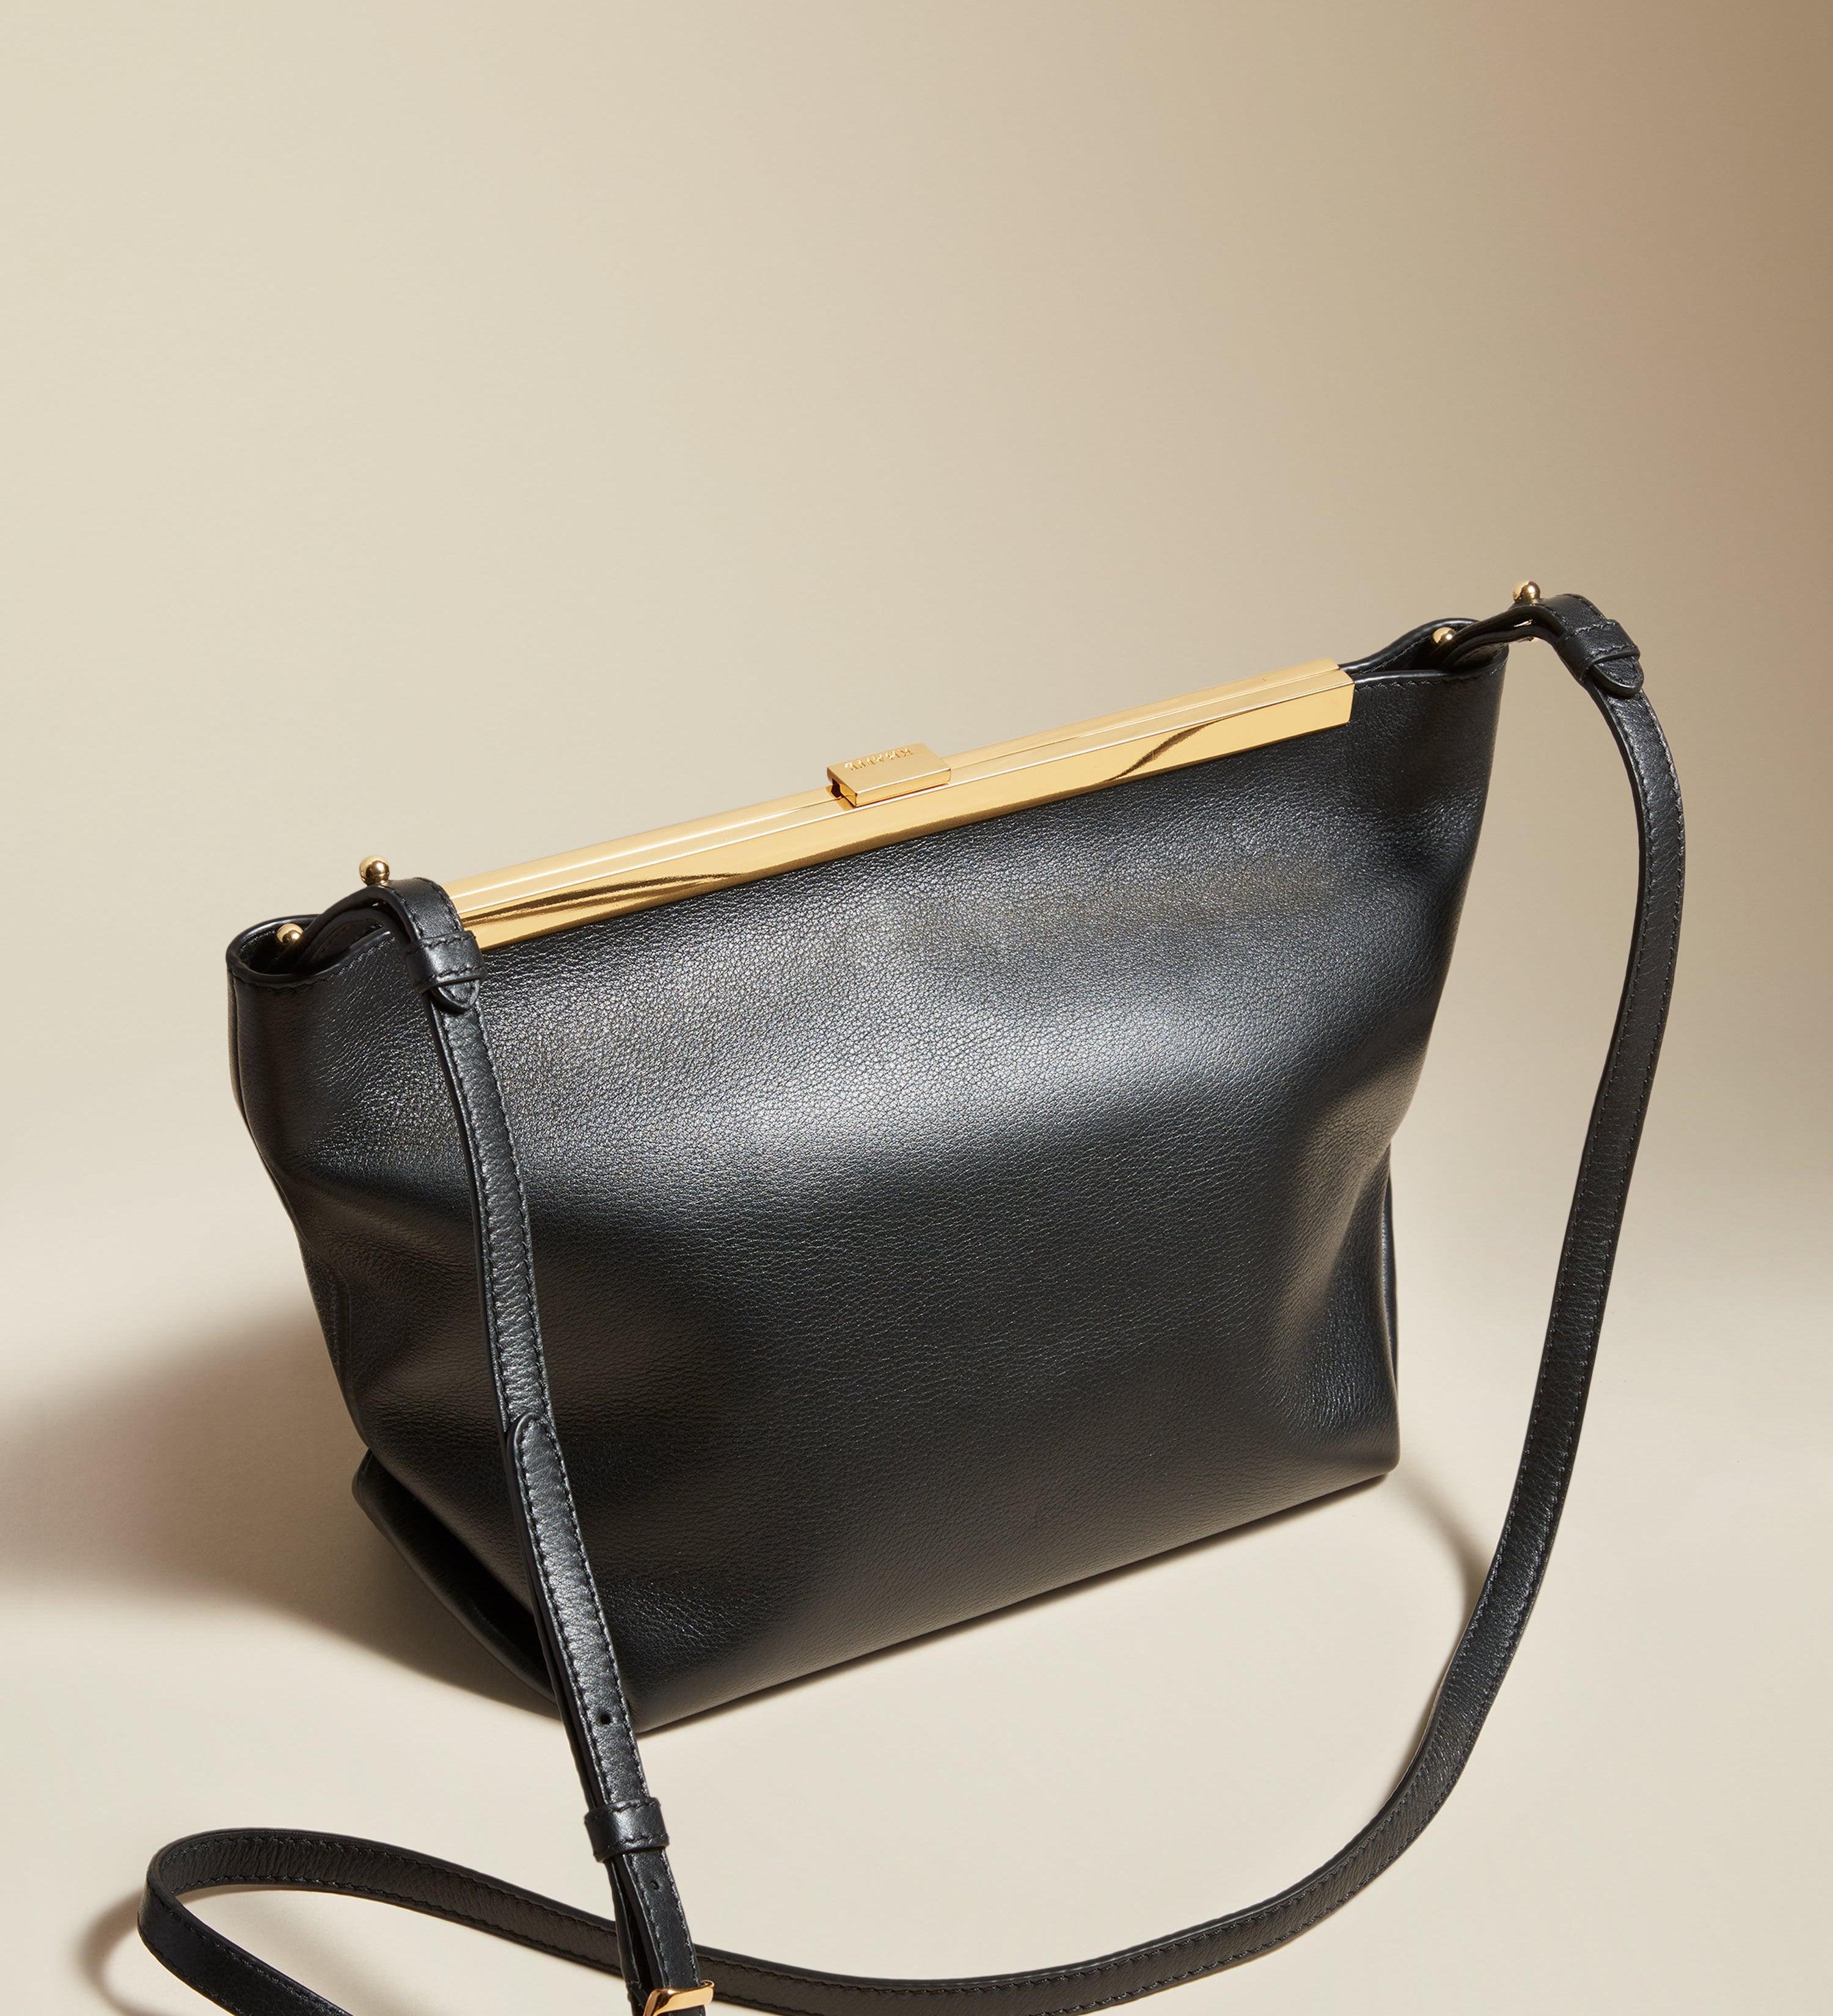 The Augusta Crossbody Bag in Black Pebbled Leather - The Iconic Issue